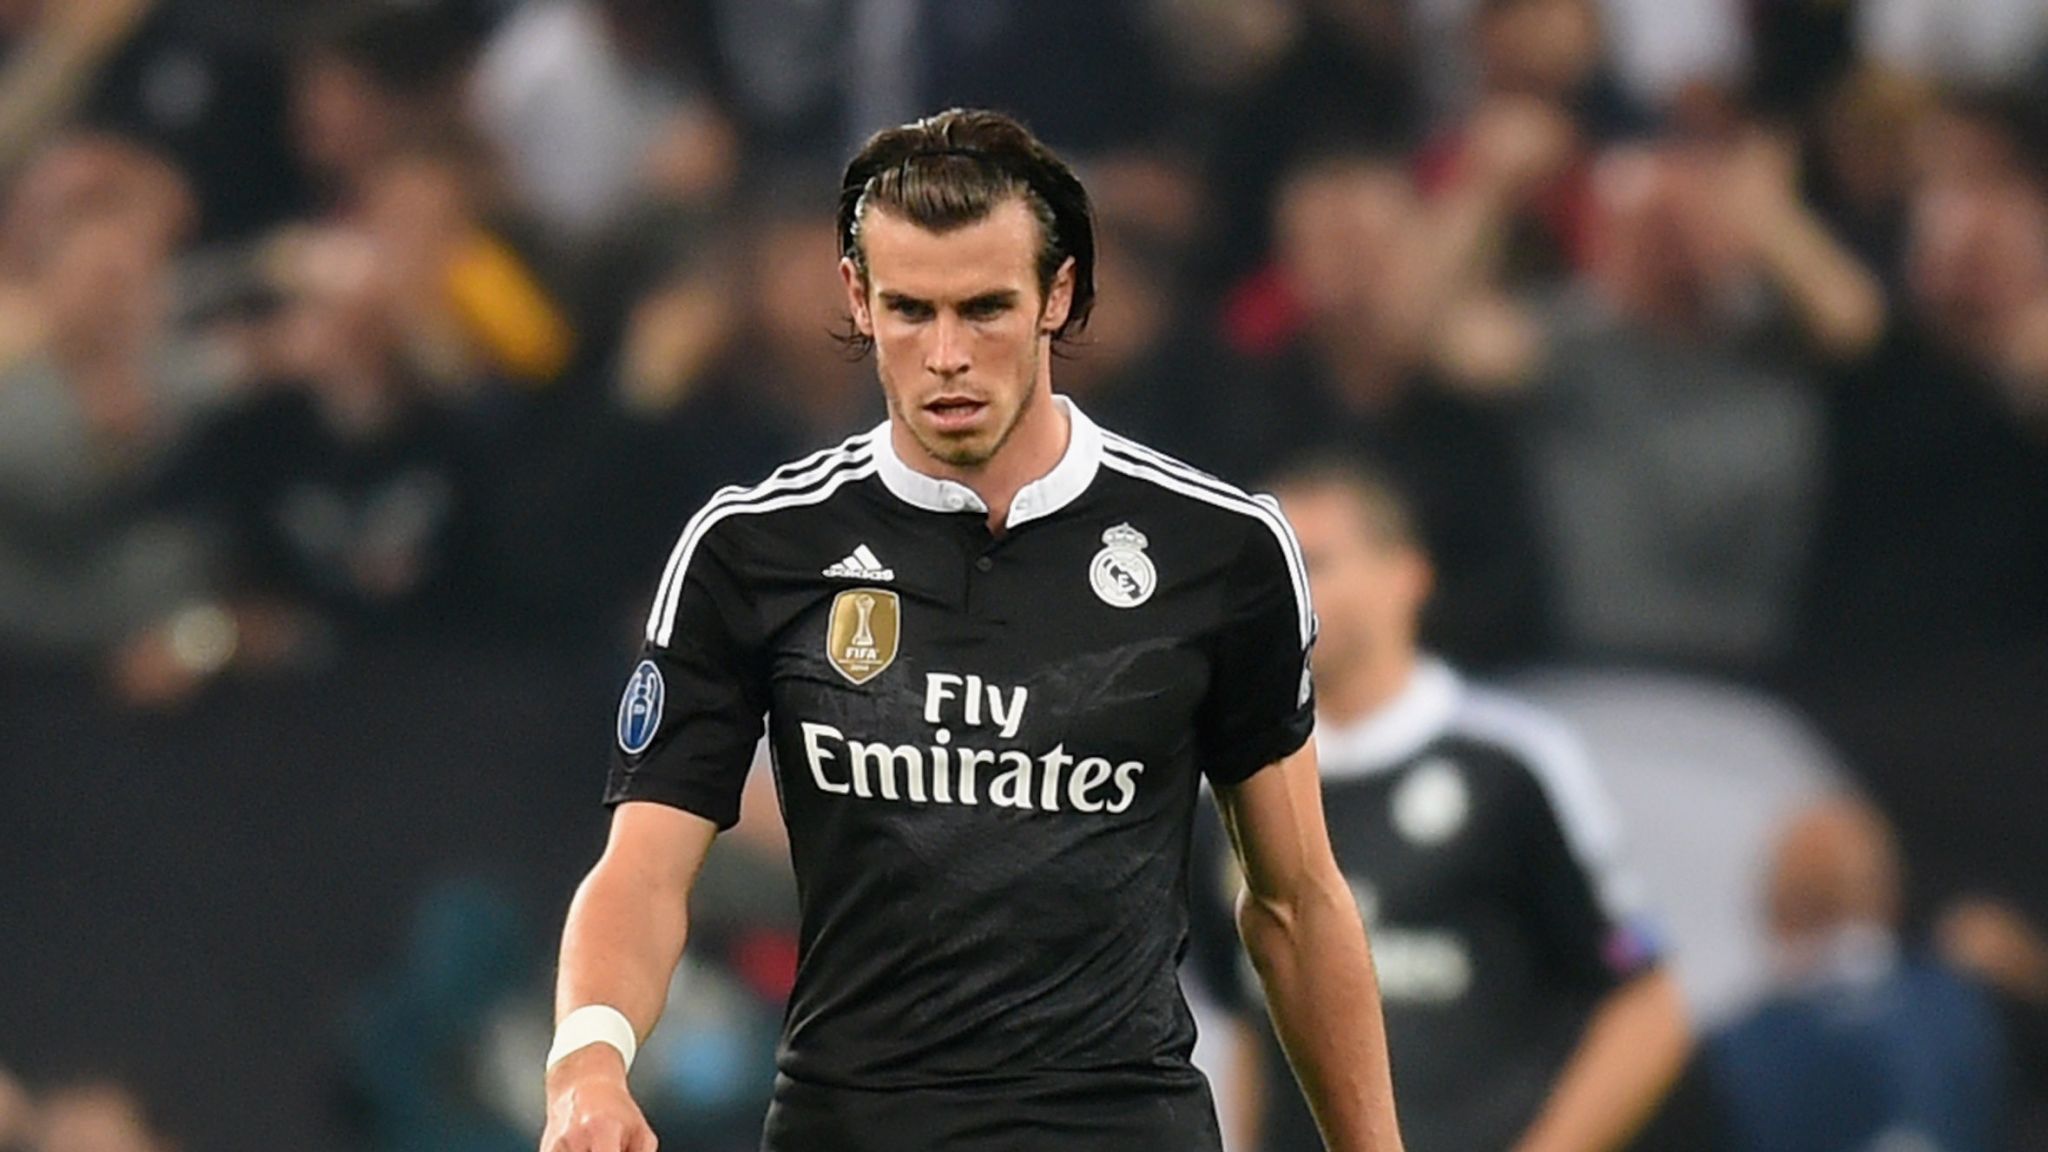 Gareth Bale struggled in Real Madrid's Champions League loss to Juventus, Football News